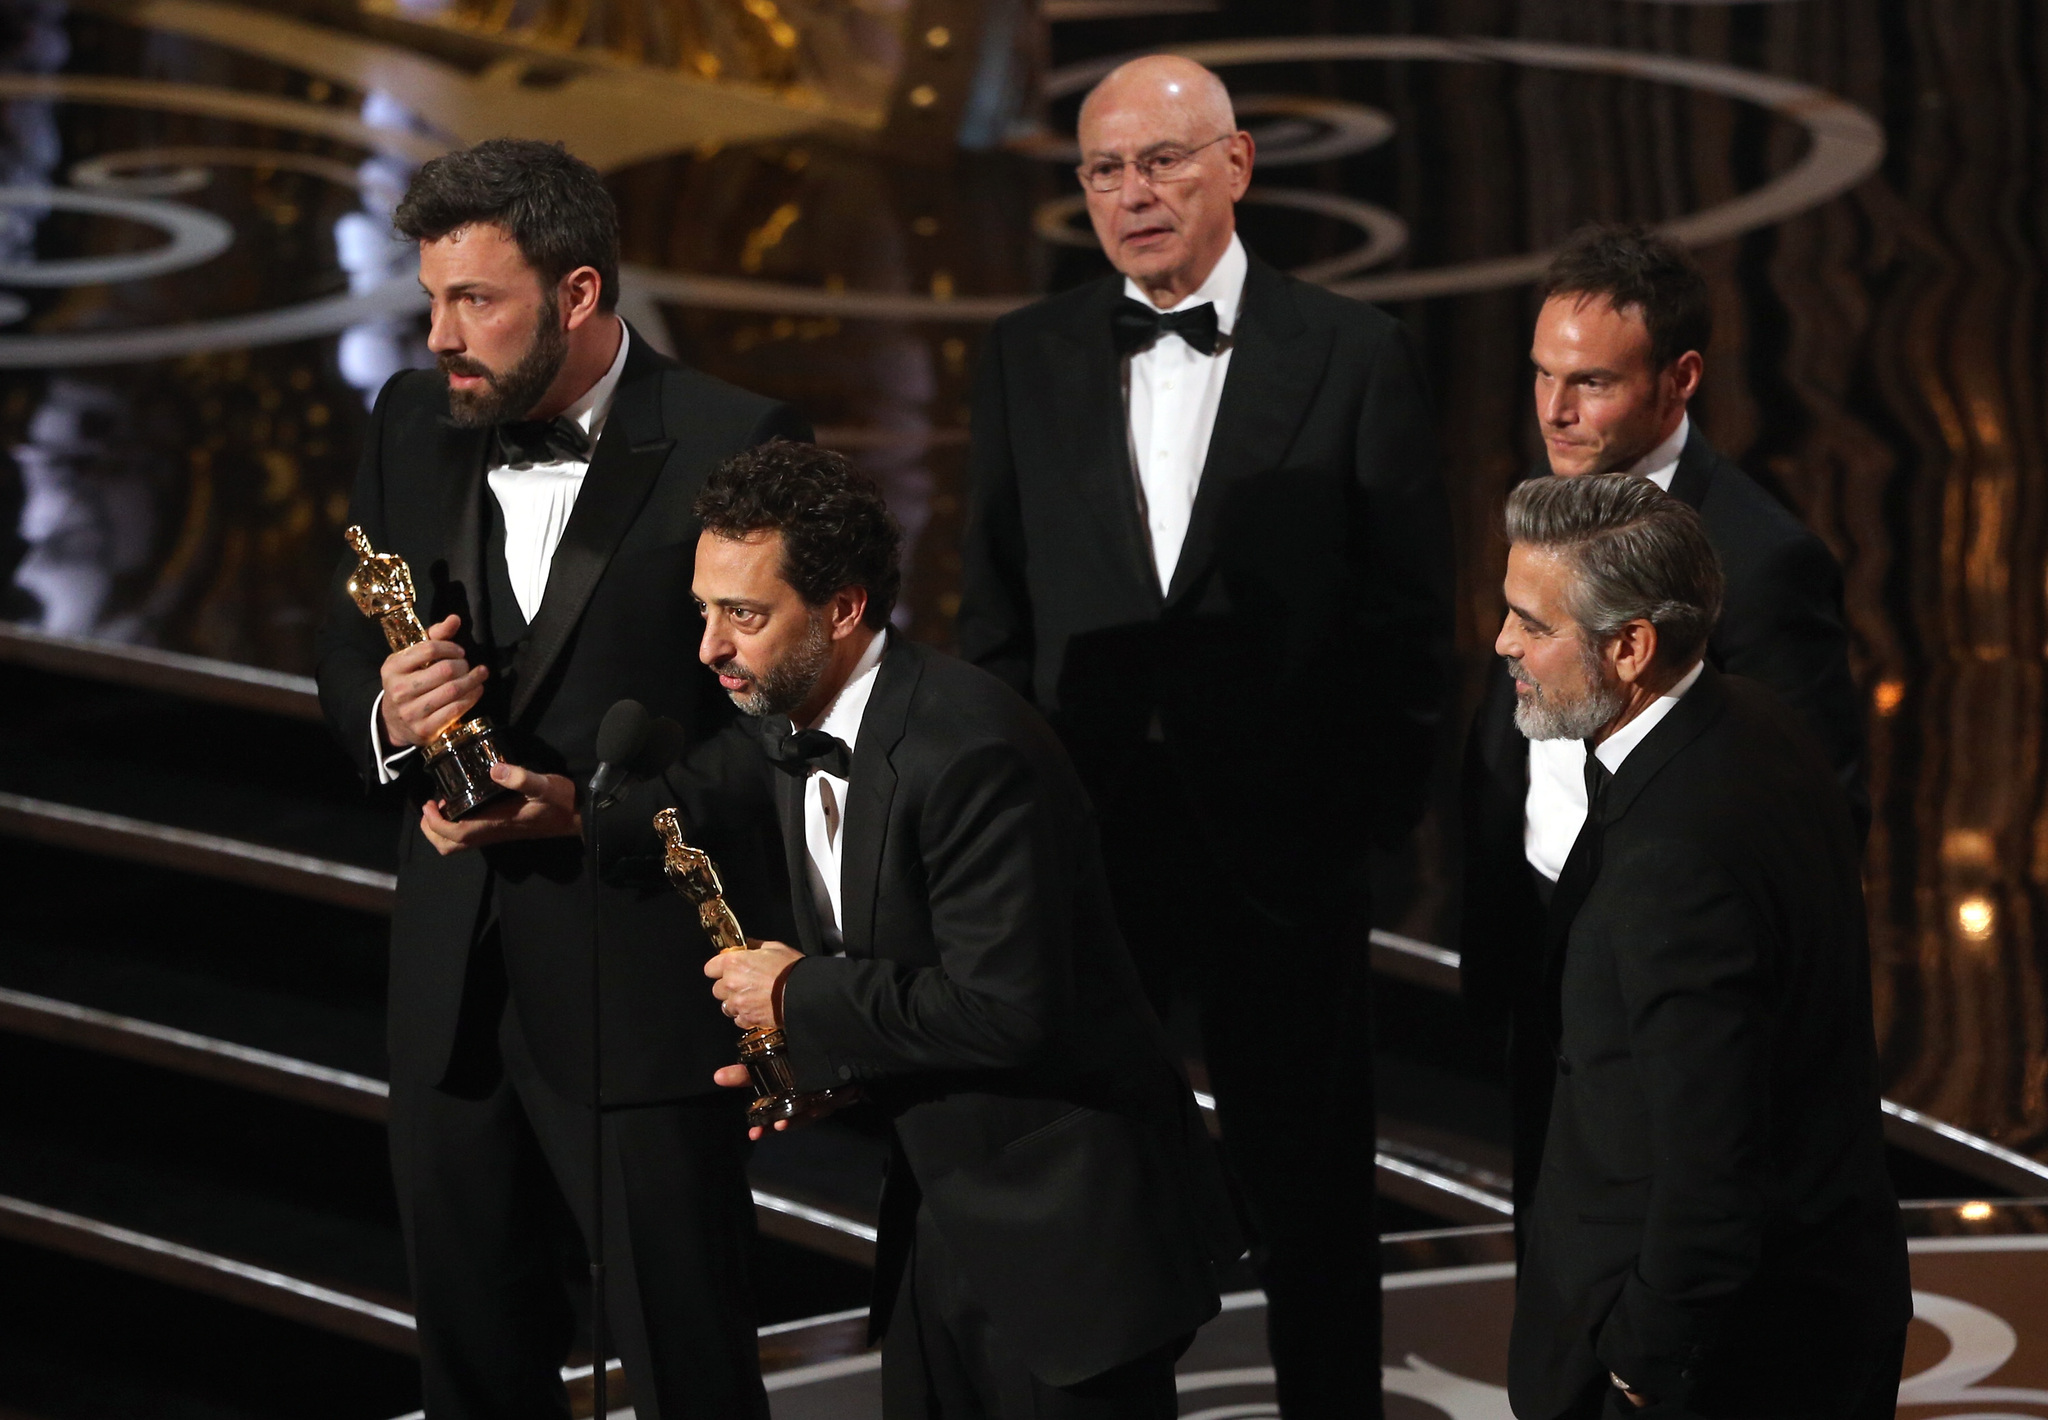 George Clooney, Ben Affleck, Alan Arkin and Grant Heslov at event of The Oscars (2013)